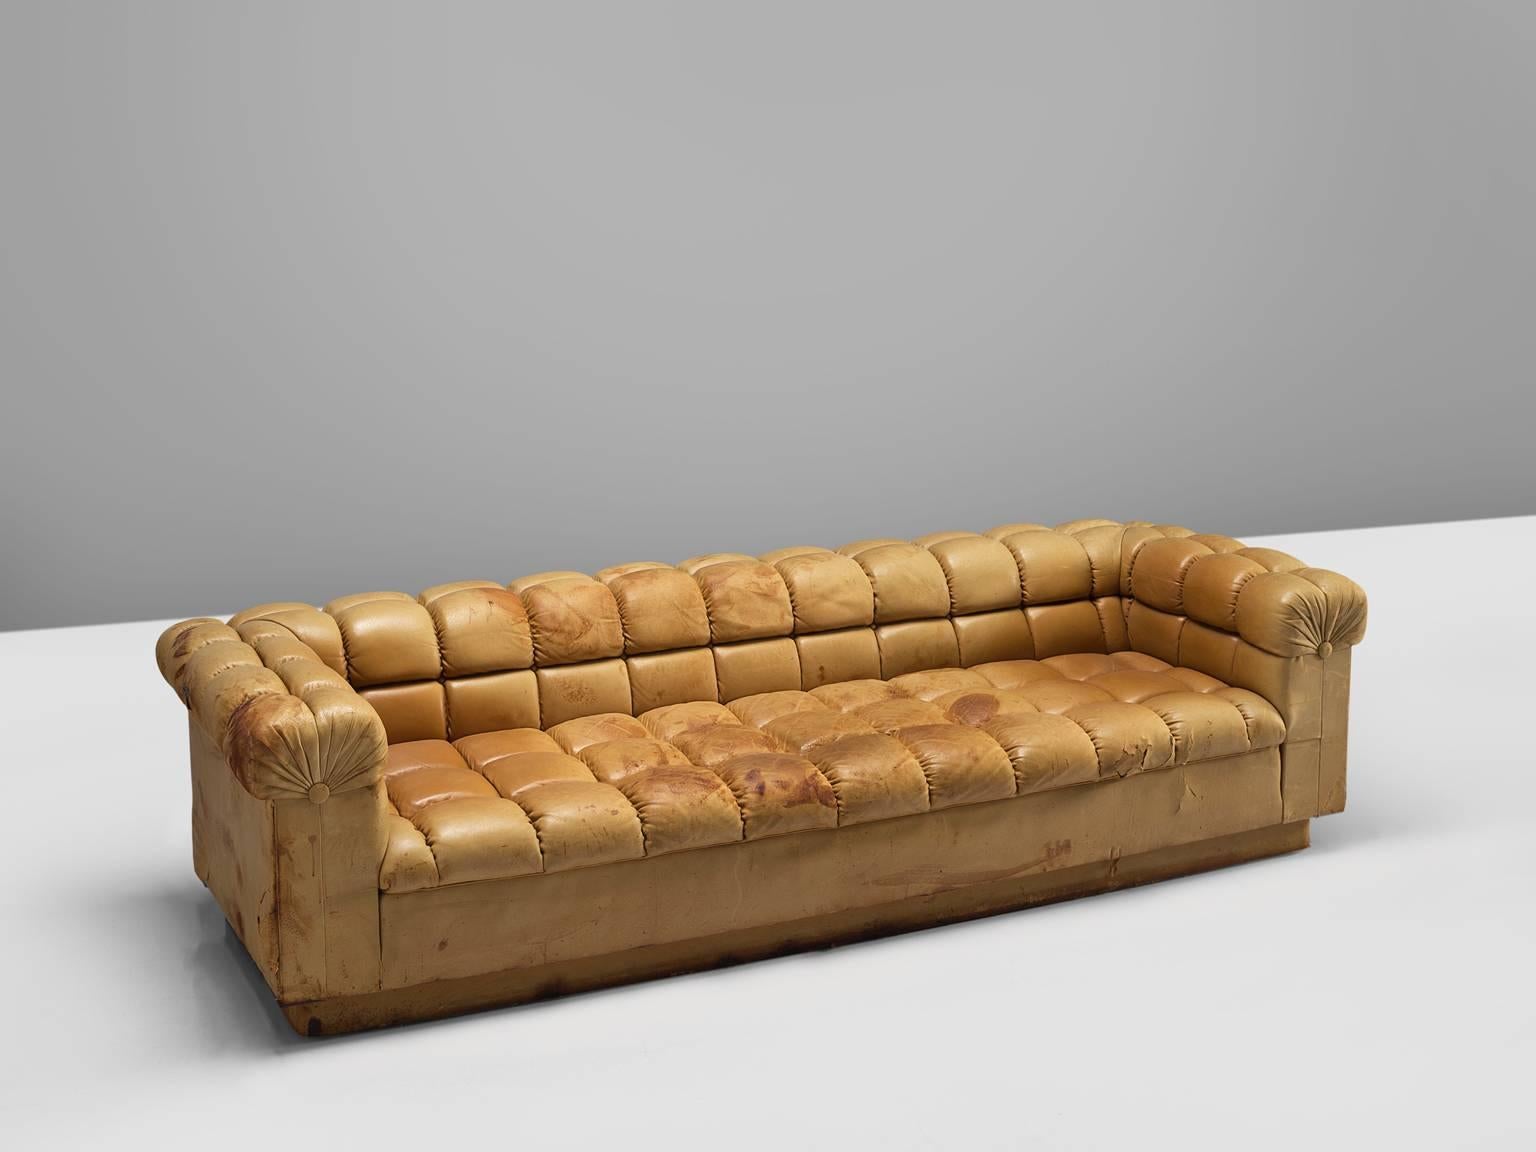 Edward Wormley for Dunbar, sofa 'Party' model 5407, in cognac leather, United States, 1950s.

Cognac leather 'Party' sofa by American designer Edward Wormley. This sofa has an interesting appearance of a Classic Chesterfield set with a modern